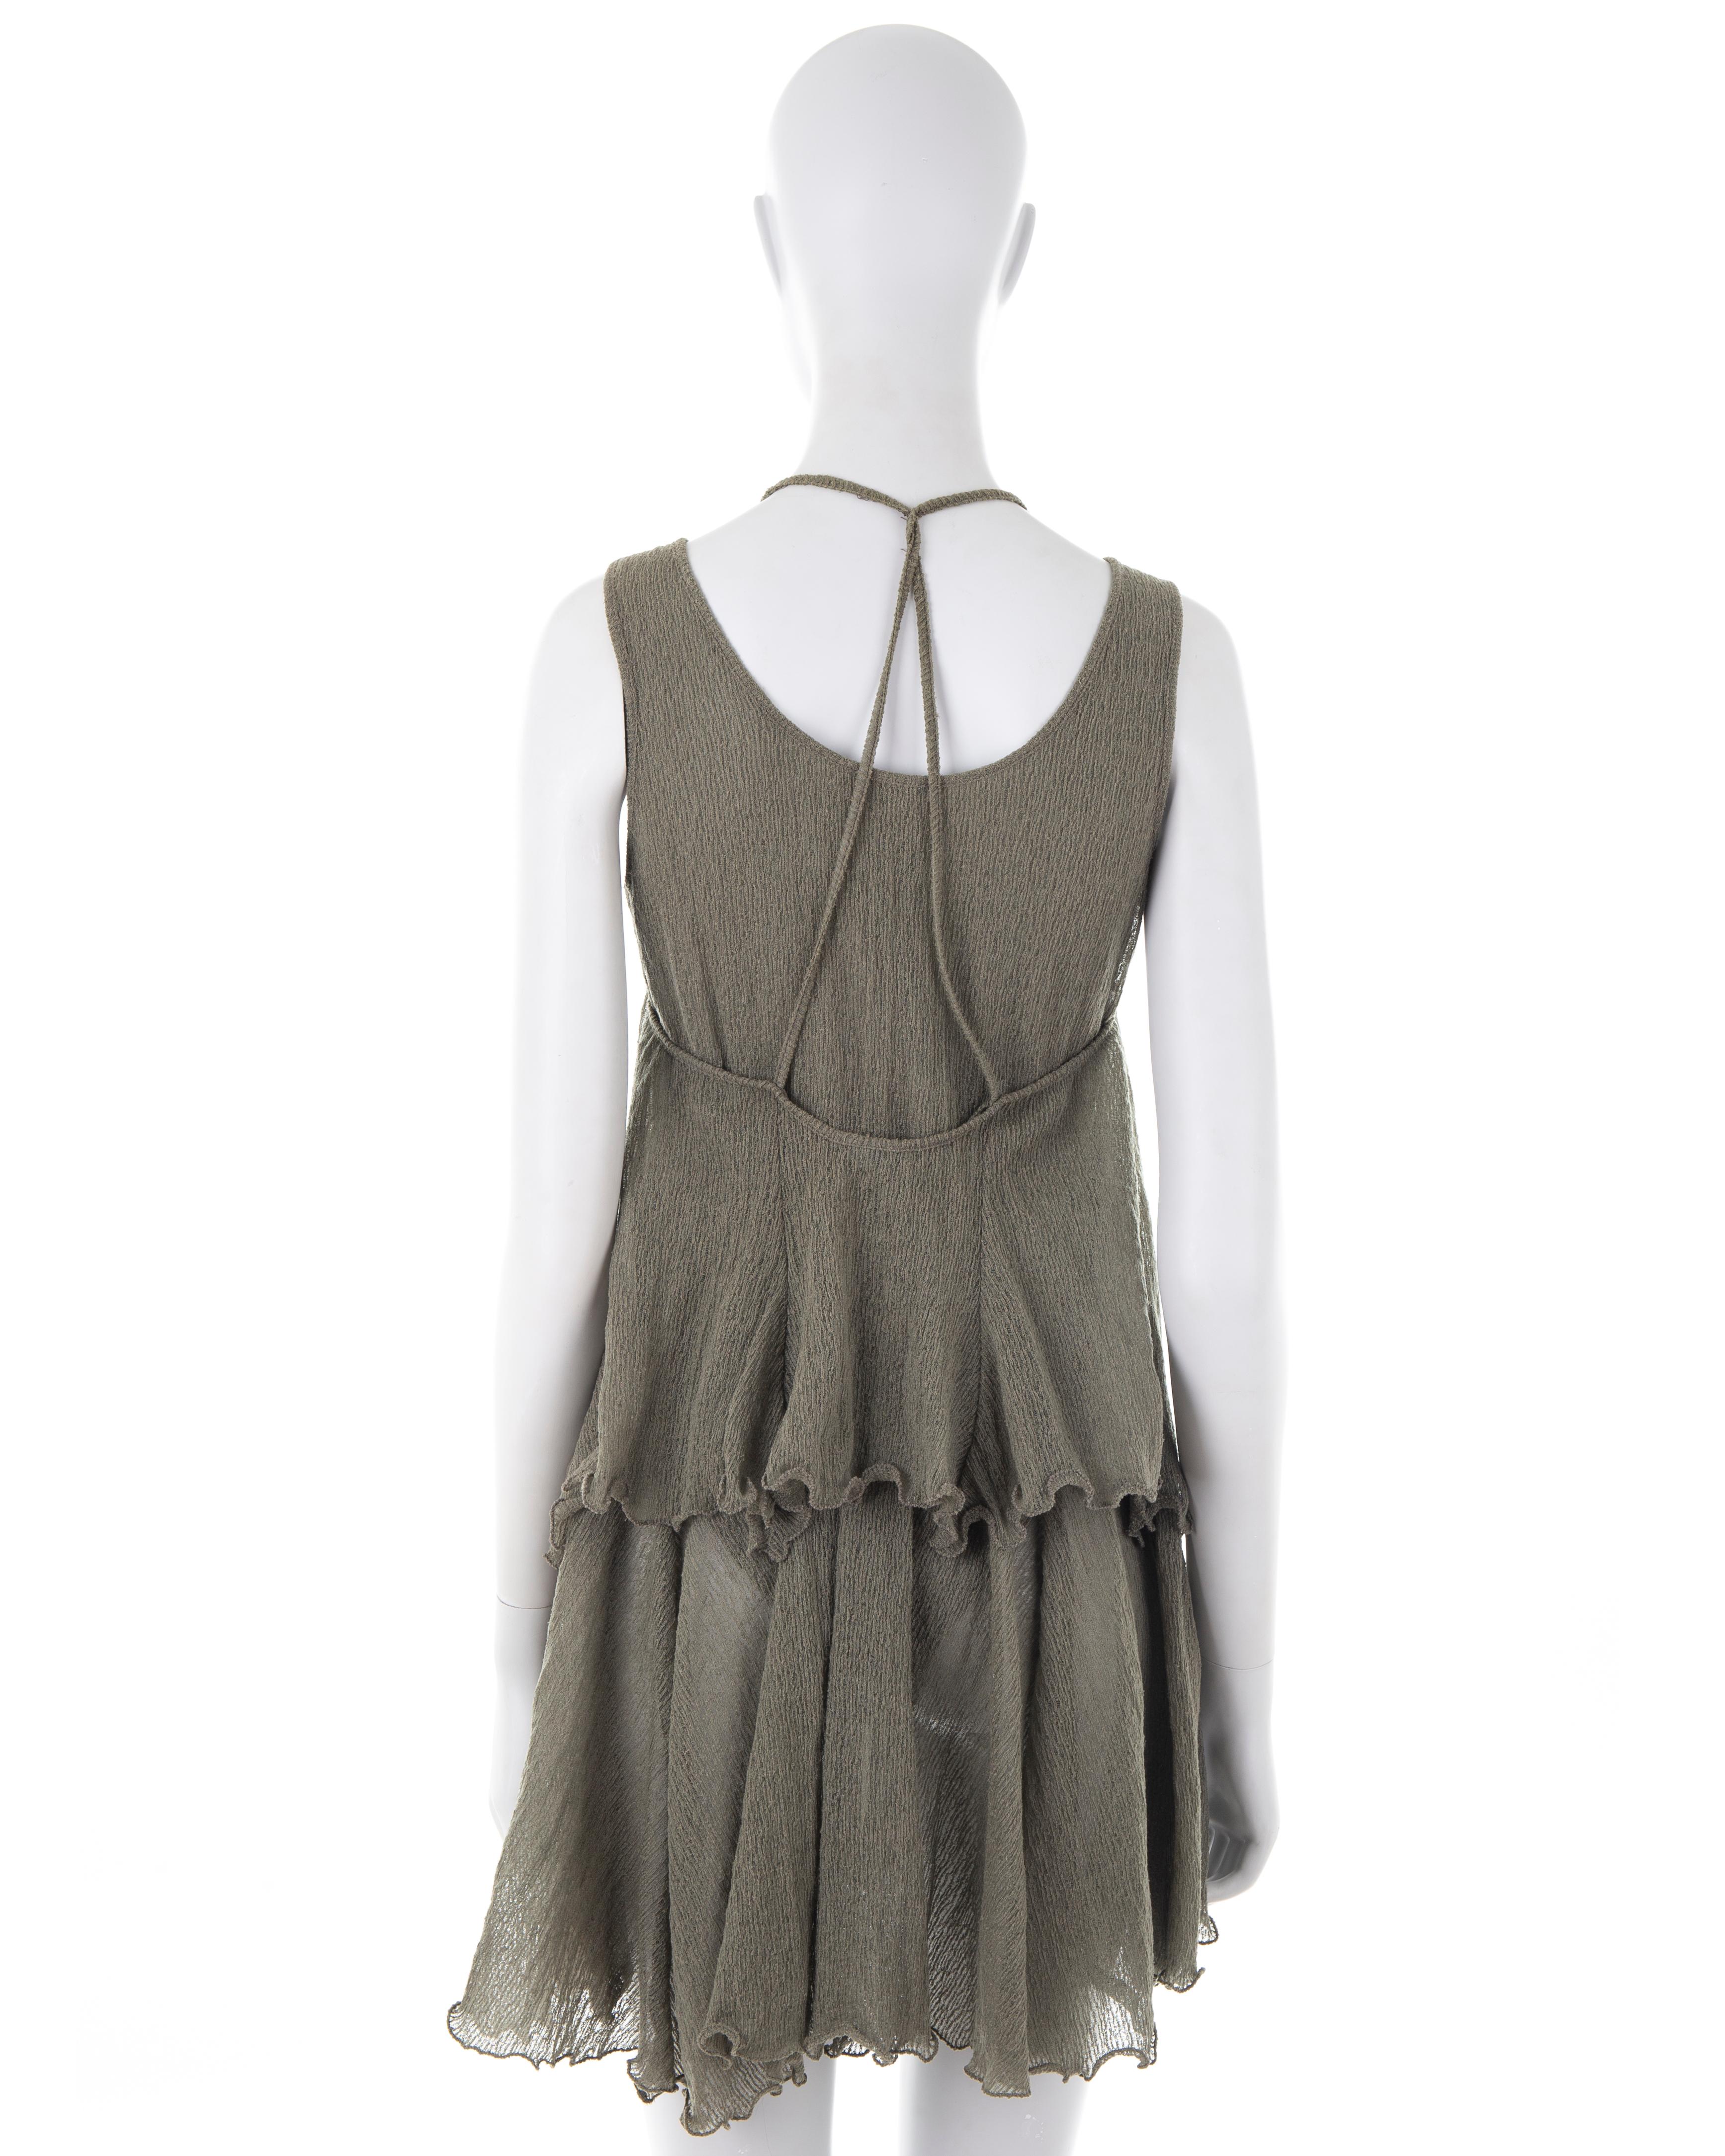 Giorgio Armani S/S 1995 taupe crinkled 2 pieces dress In Excellent Condition For Sale In Rome, IT